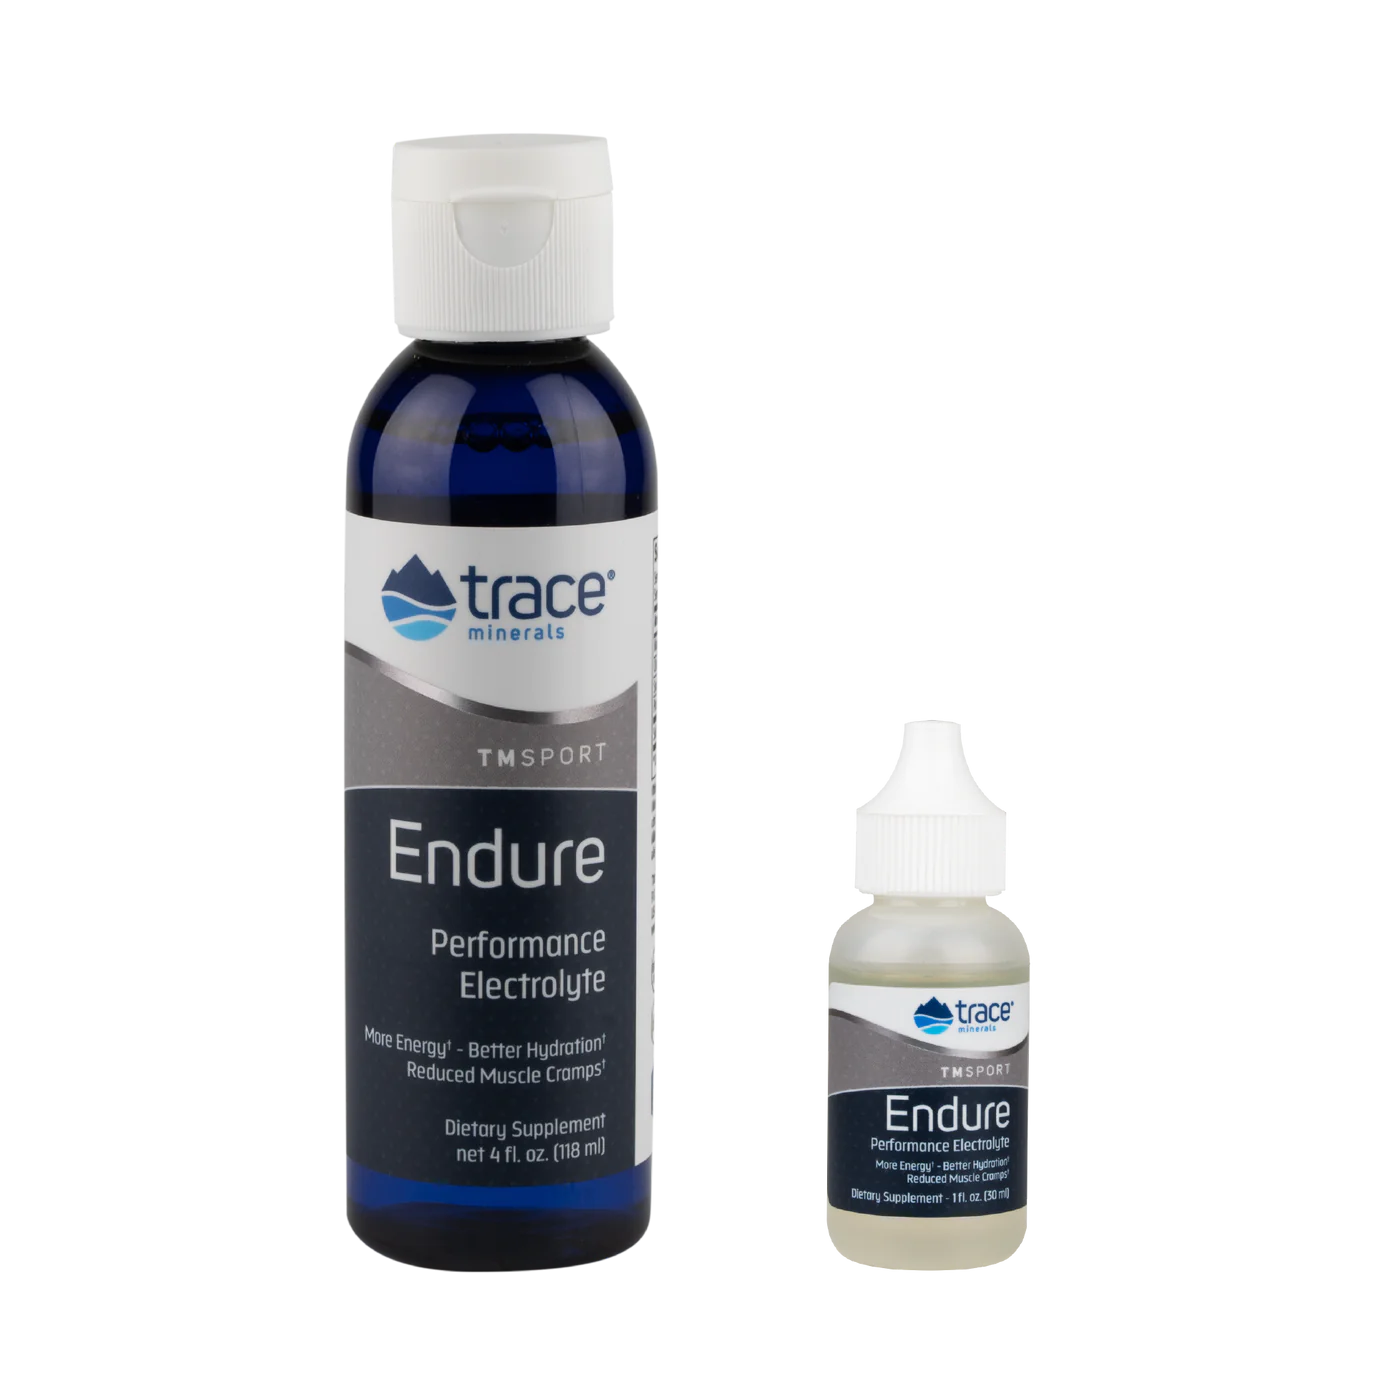 Endure - Performance Electrolyte - Trace Minerals